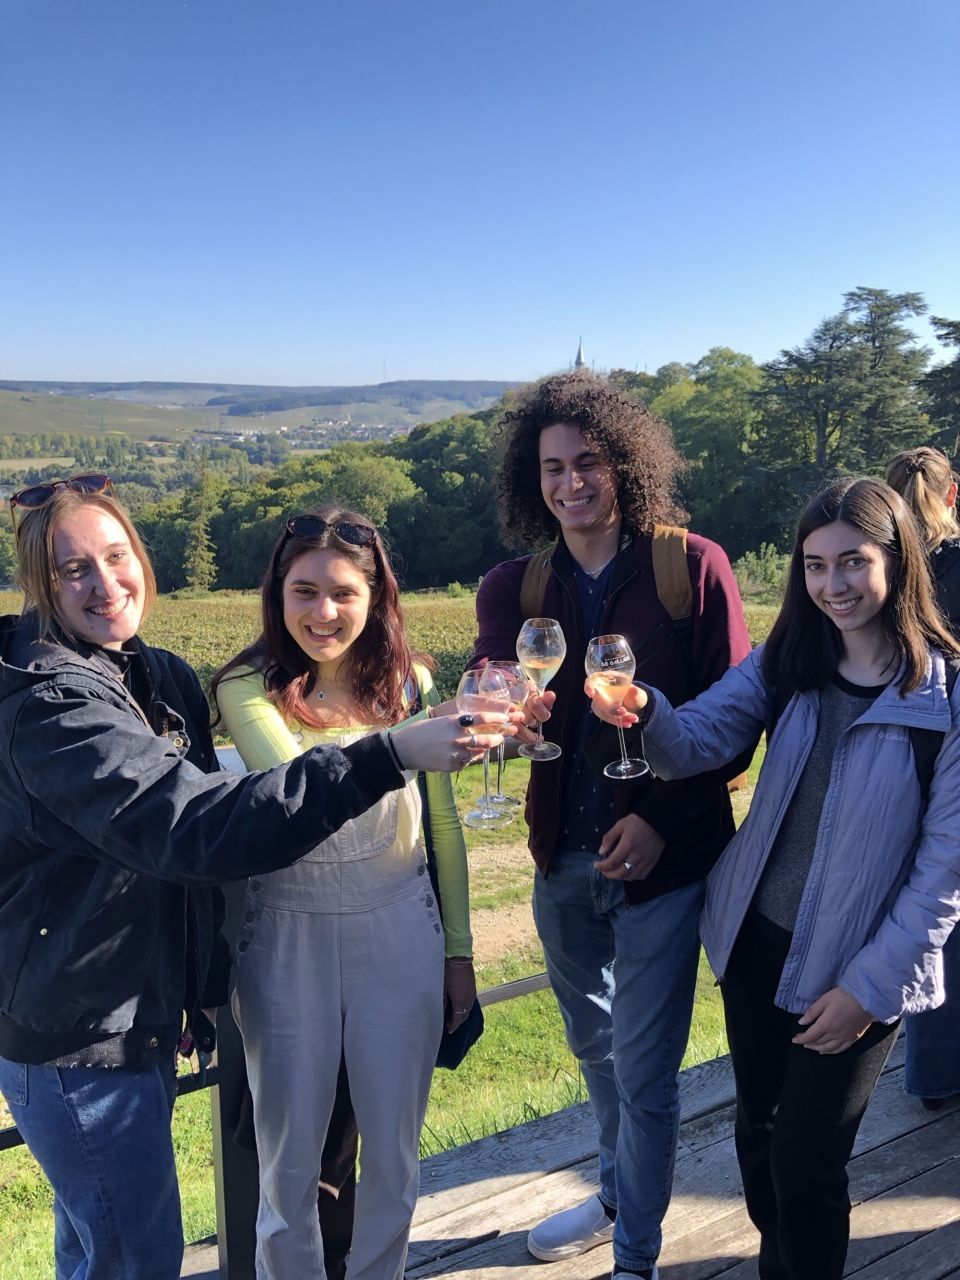 Students in Paris on a day trip in Champagne with wine